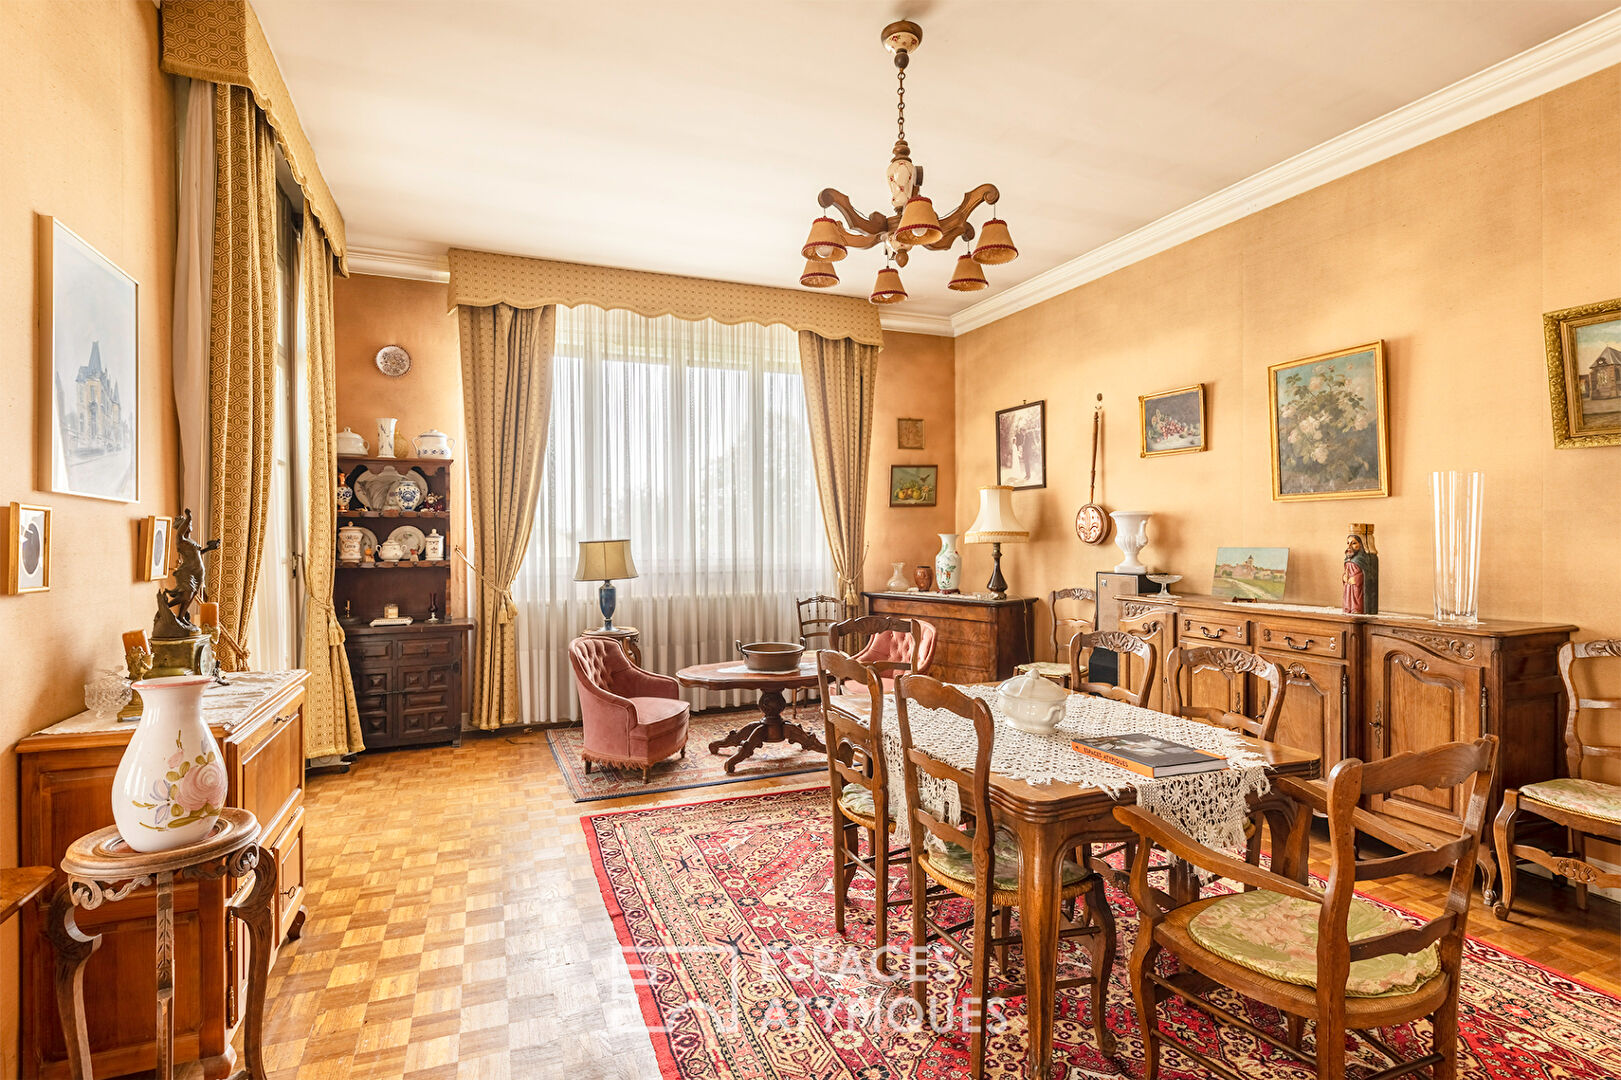 La grandiose – Family house of 251sqm living space and its independent professional space.